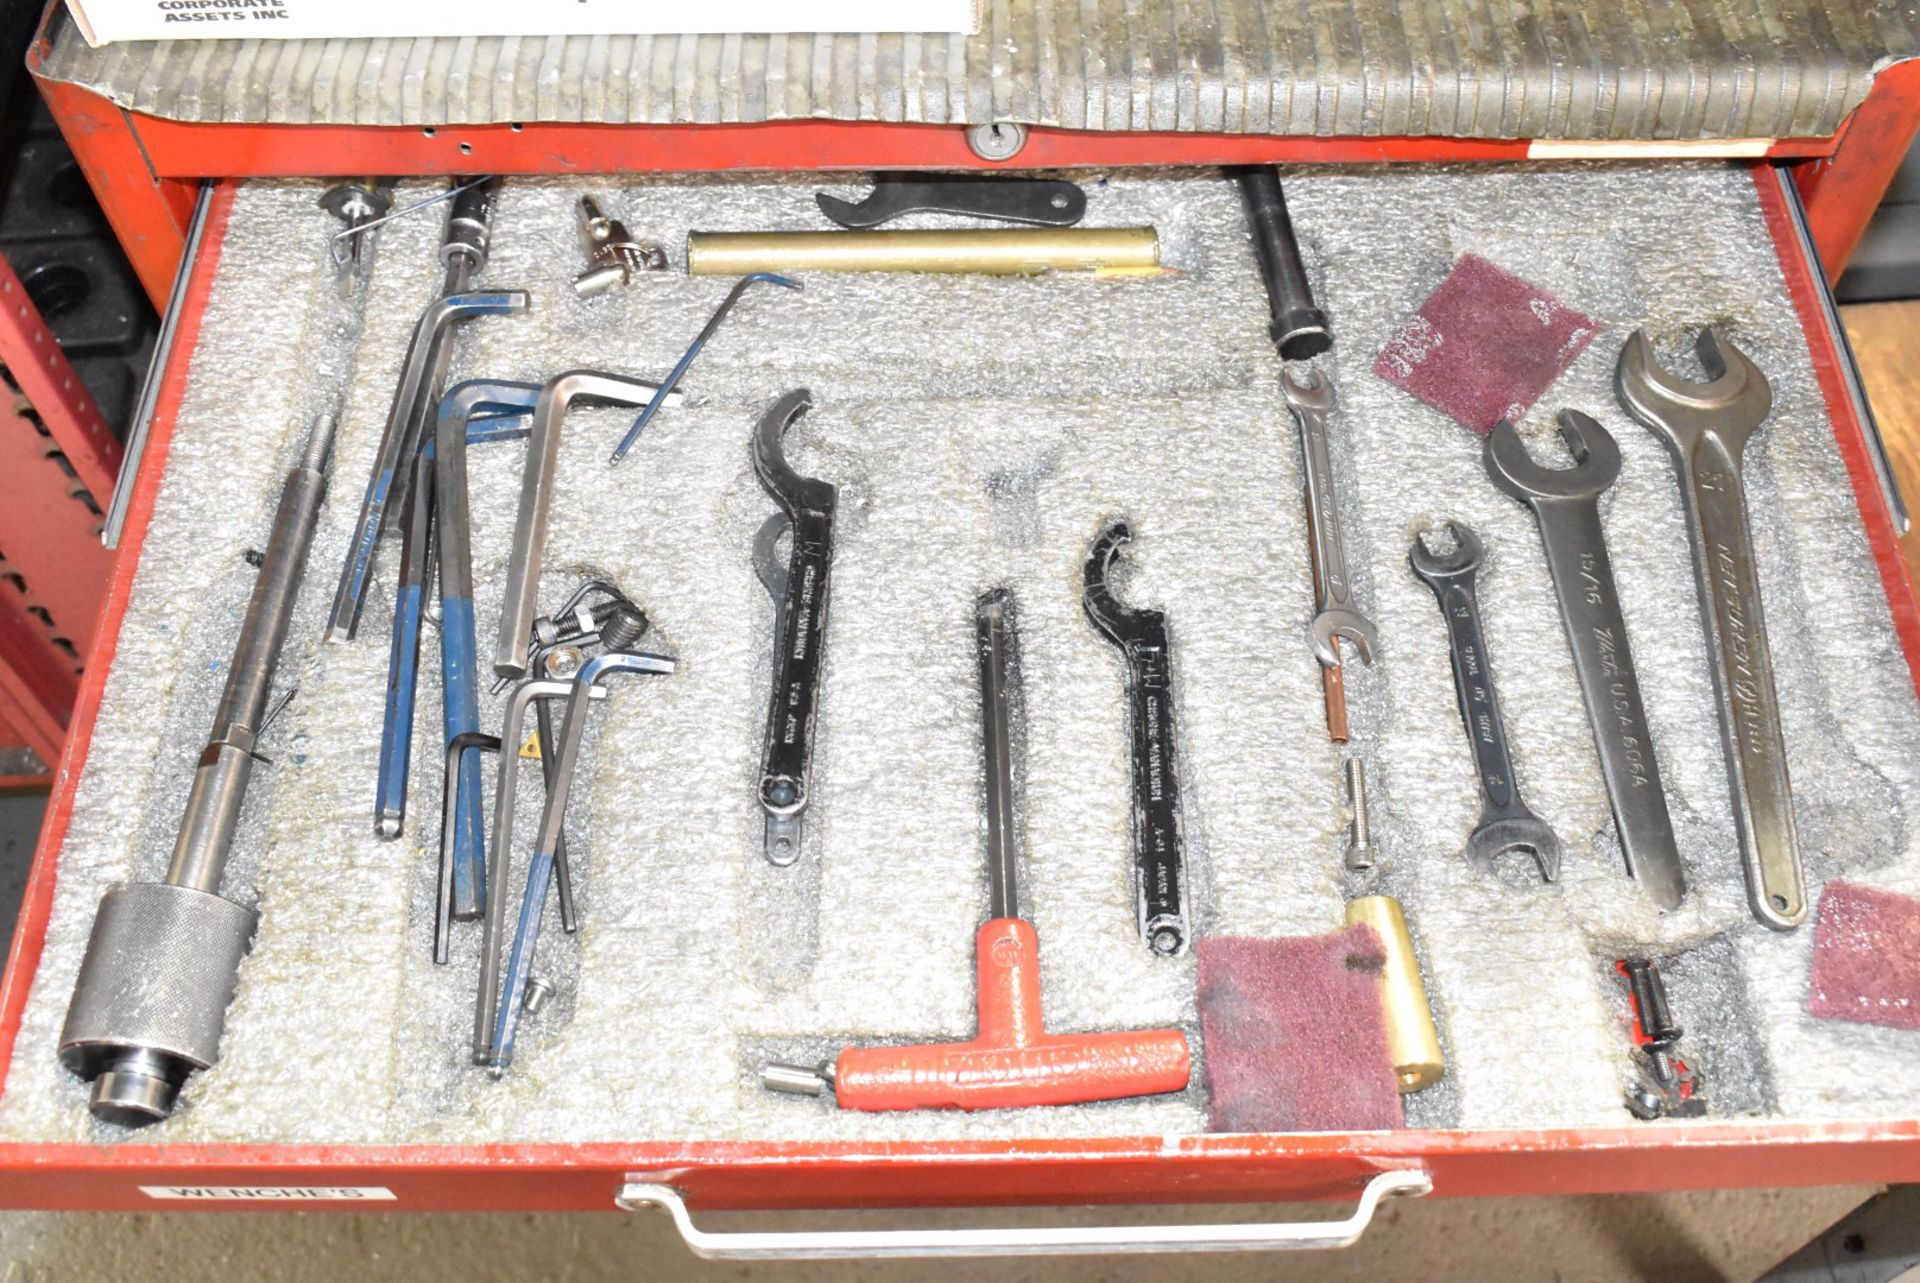 LOT/ ROLLING TOOLBOX WITH CHUCK JAWS, COLLETS, SLEEVES & HAND TOOLS - Image 2 of 8